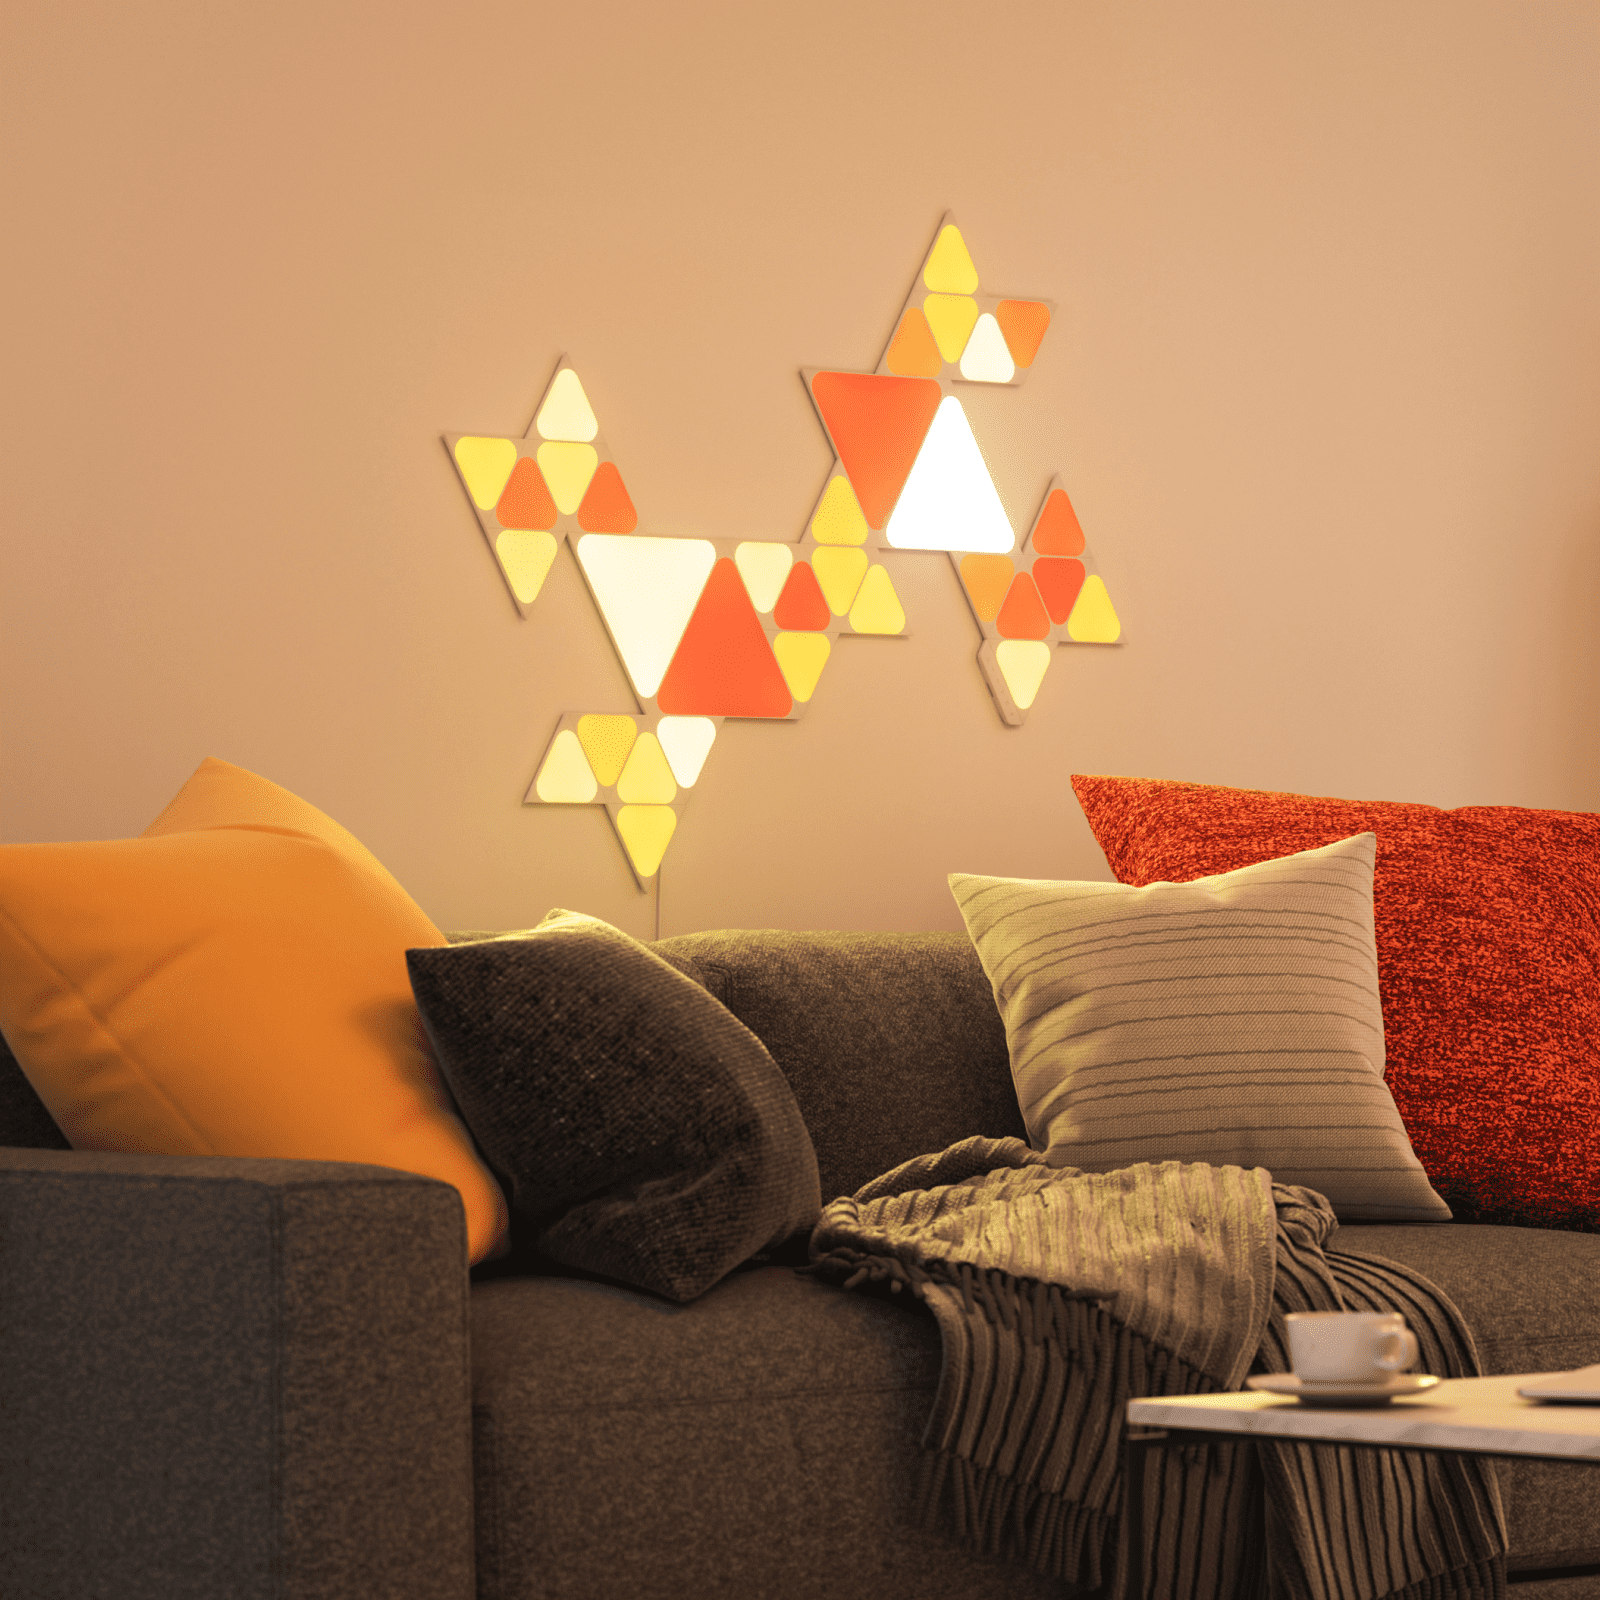 Nanoleaf Shapes Thread enabled color changing triangle and mini triangle smart modular light panels.